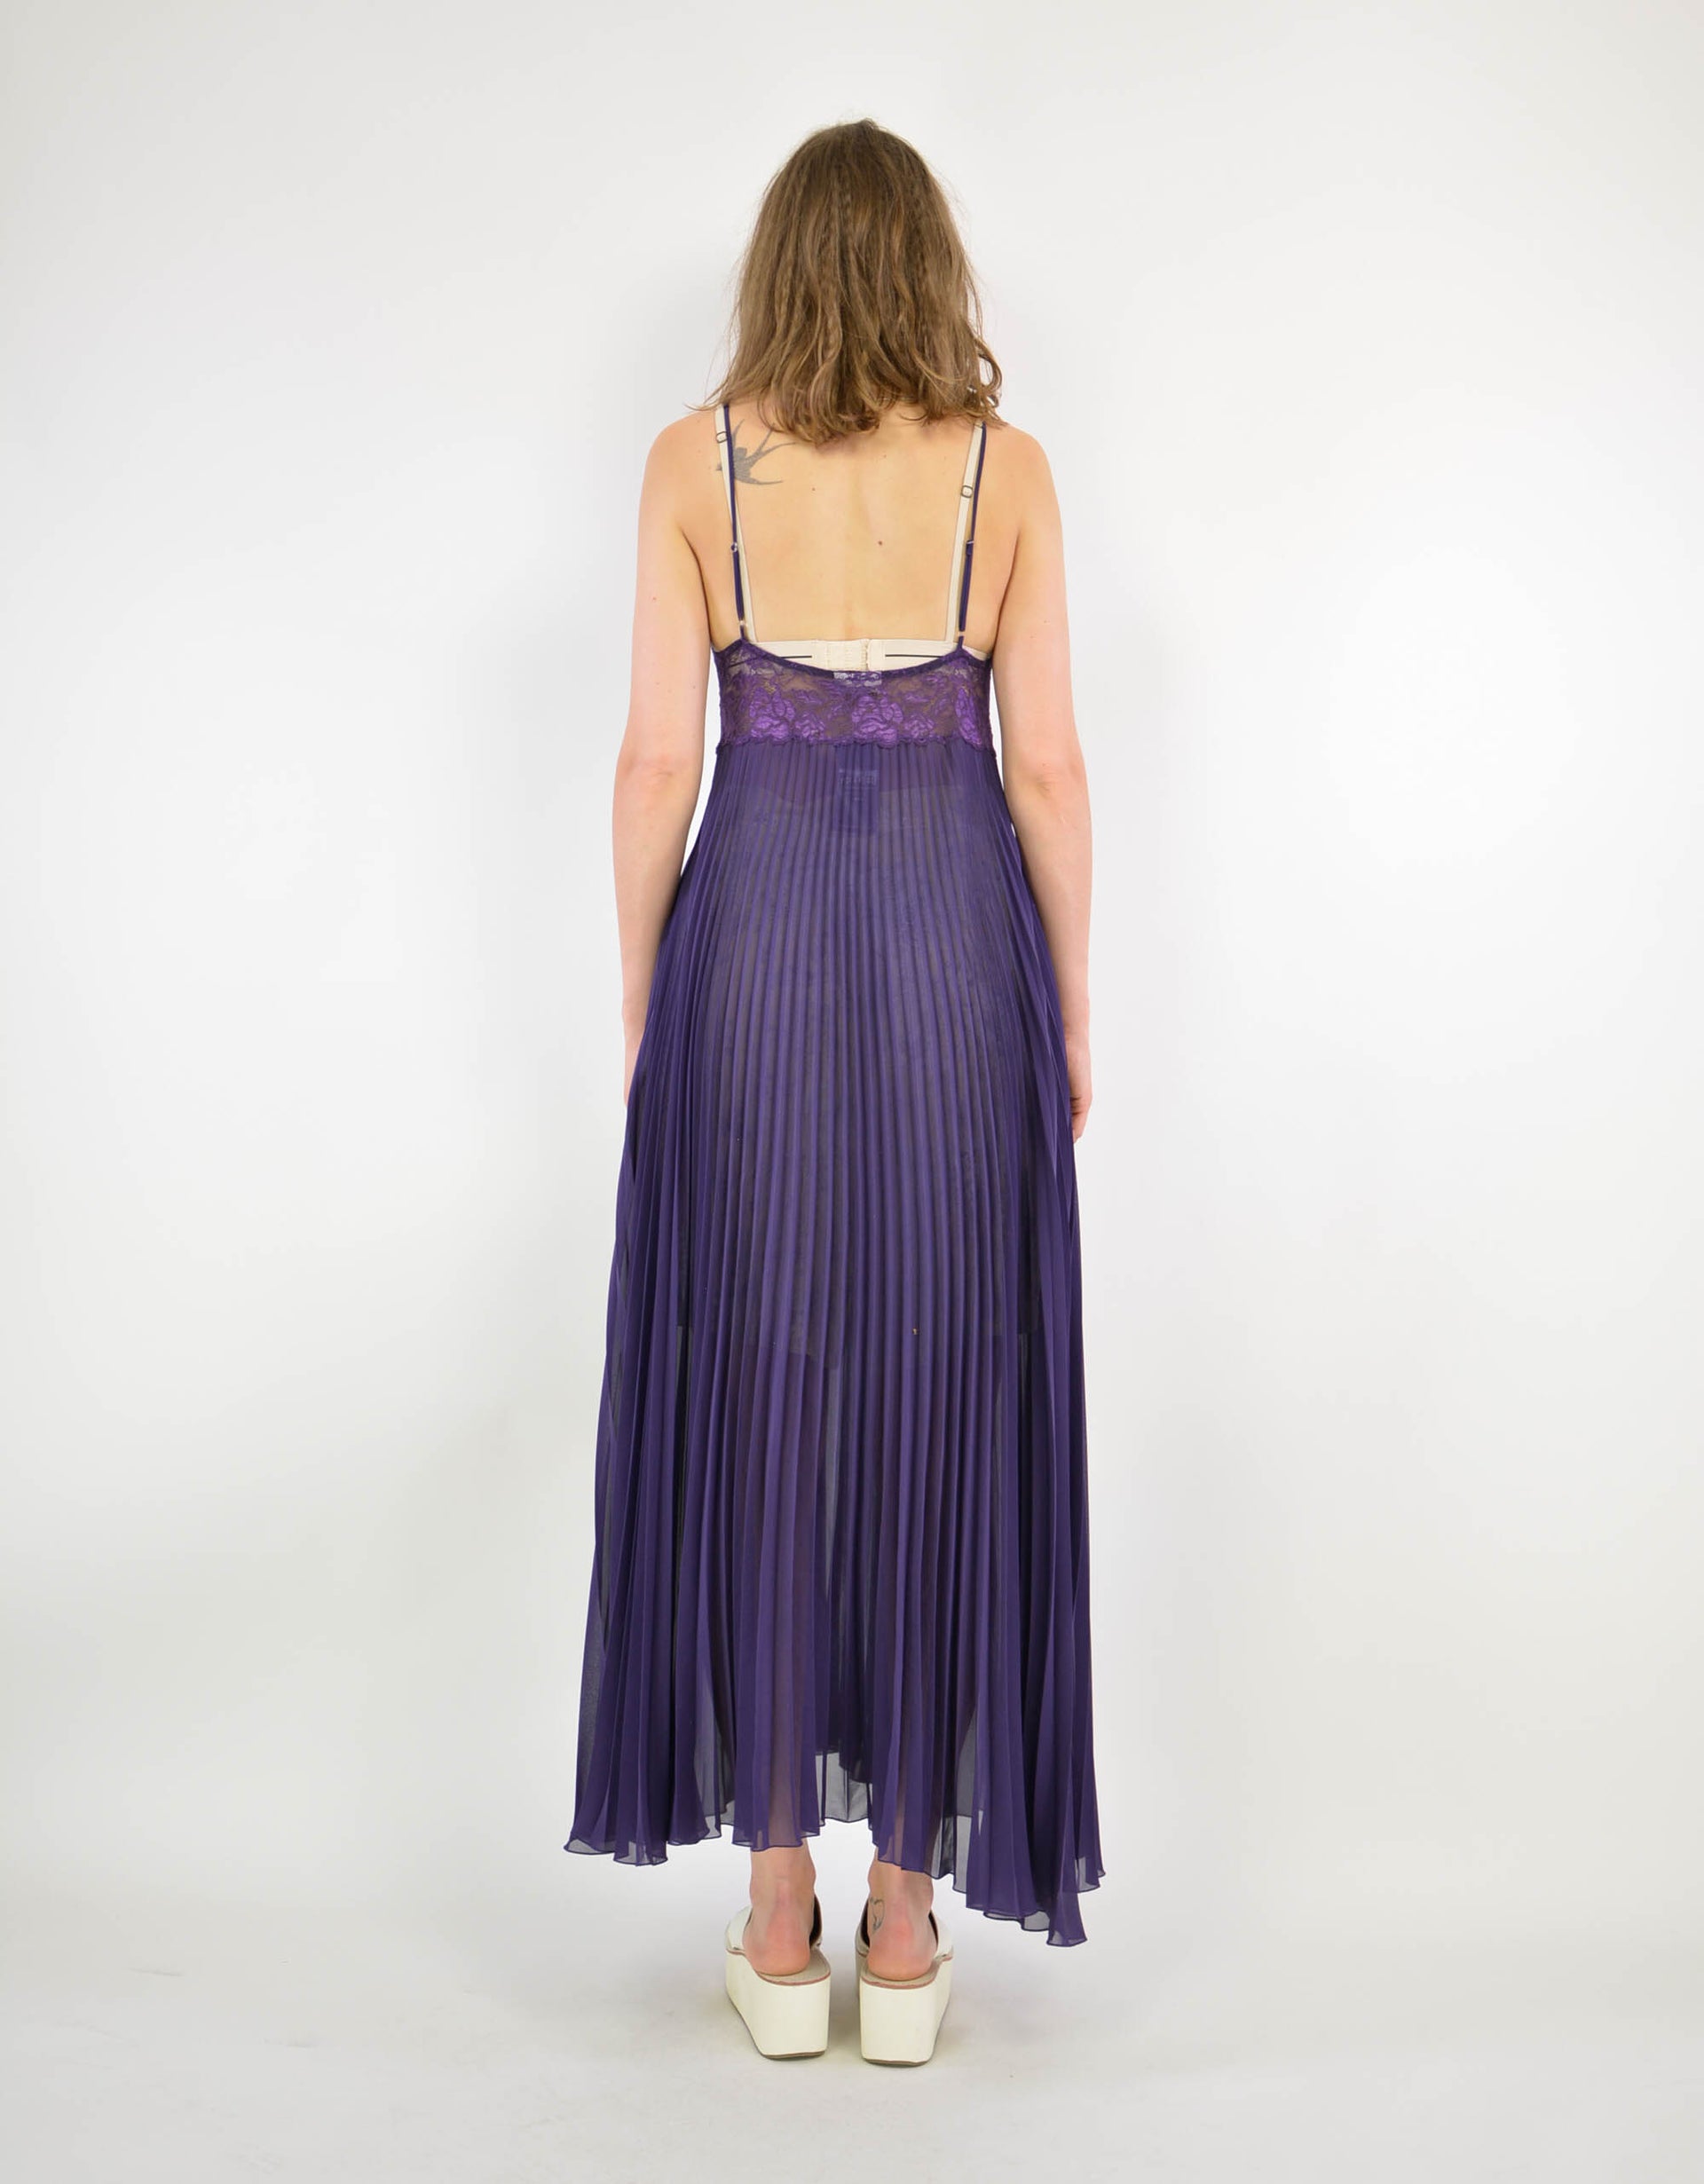 Negligee long - PICKNWEIGHT - VINTAGE KILO STORE